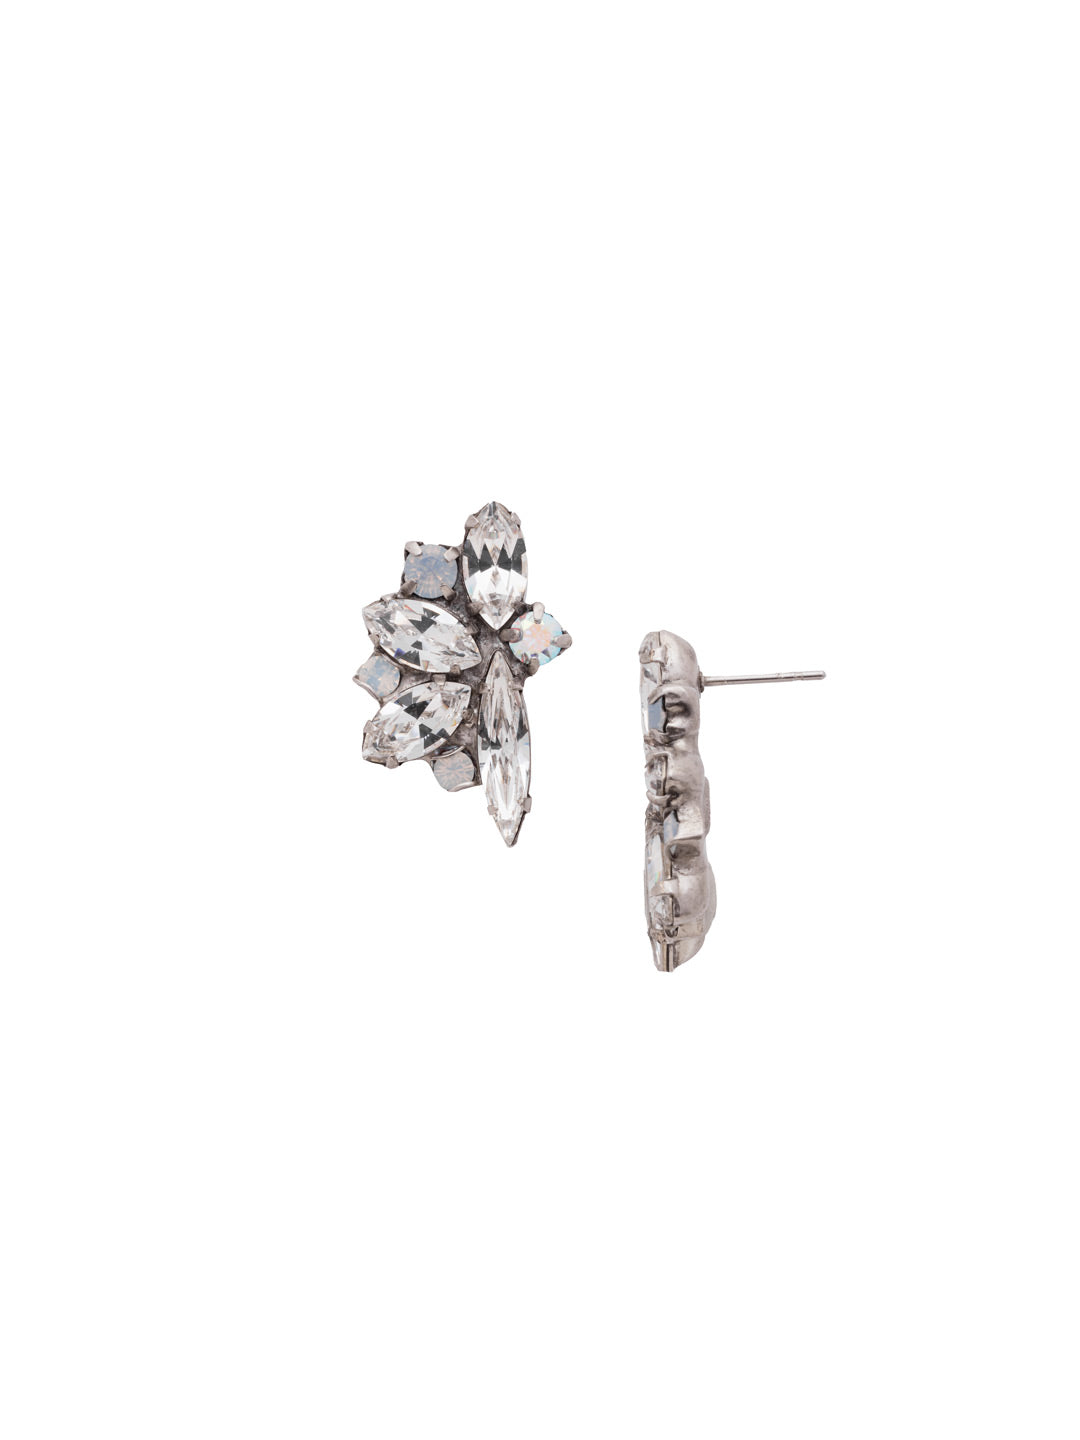 Fanned Vavette Stud Earrings - ECZ21ASWBR - <p>Looking sharp! This post earring features a series of pointed navette crystals fanned out from a central round crystal. From Sorrelli's White Bridal collection in our Antique Silver-tone finish.</p>